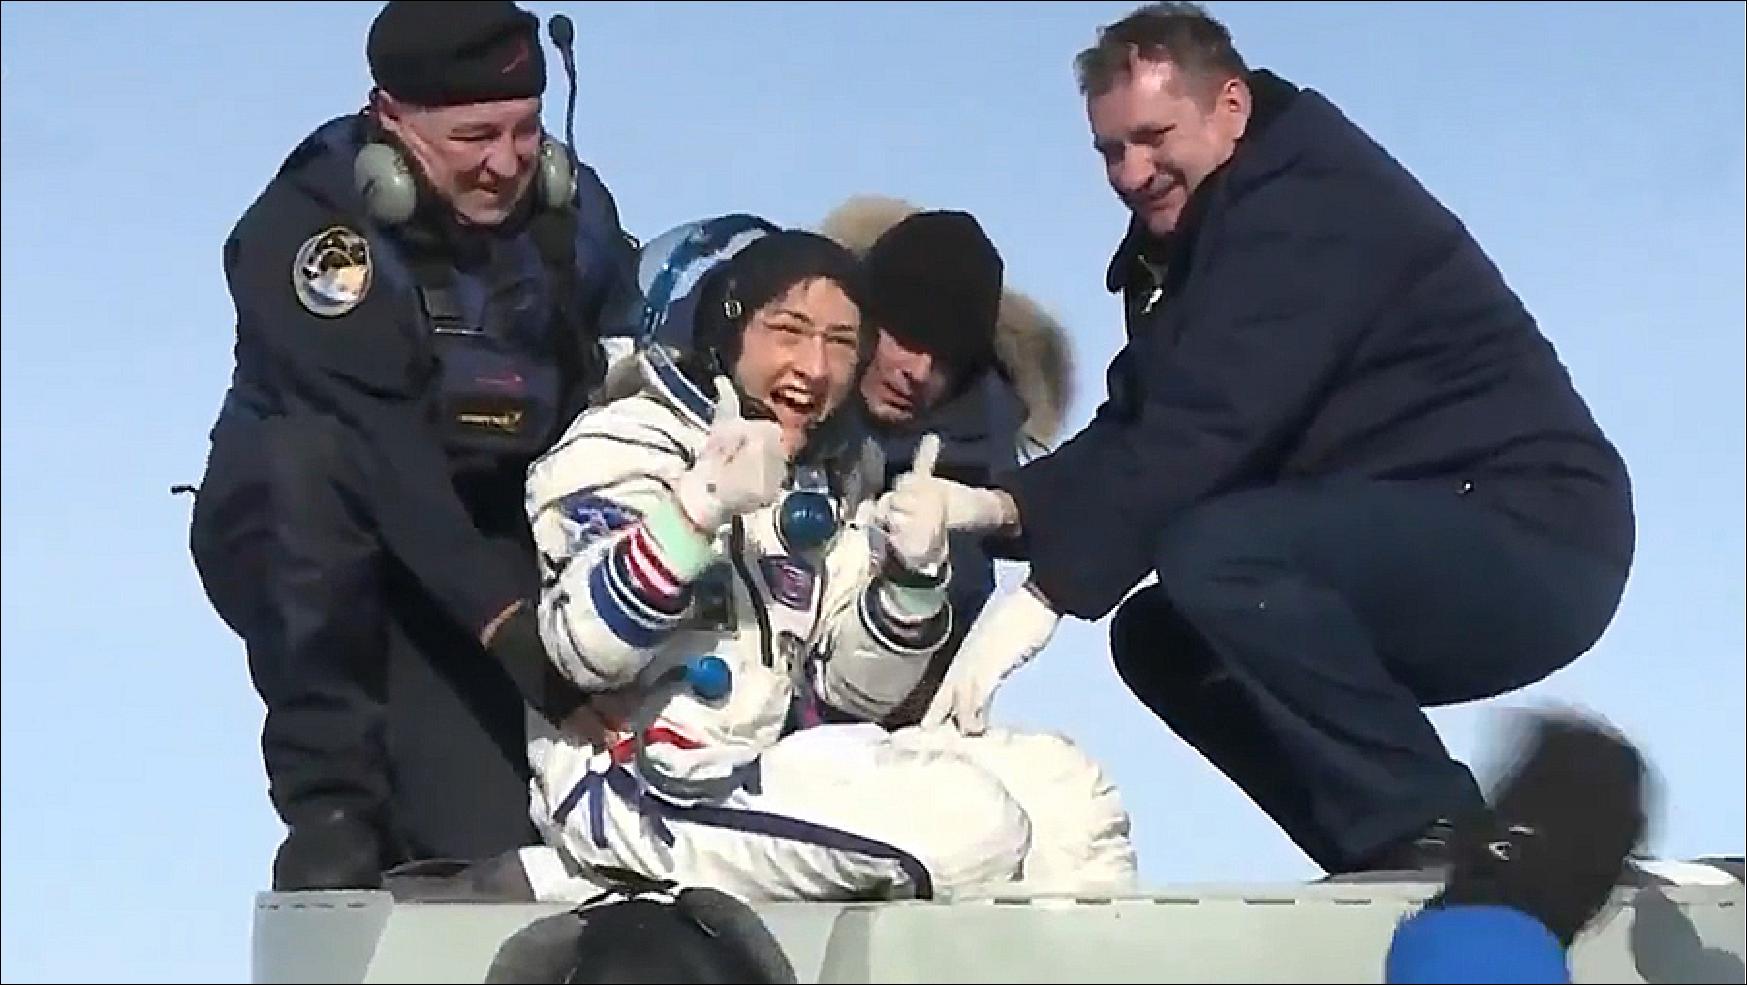 Figure 110: Astronaut Christina Koch smiles as she gives a "thumbs up" sign shortly after being extracted from the Soyuz MS-13 crew ship that brought her home after 328 days in space (image credit: NASA TV)